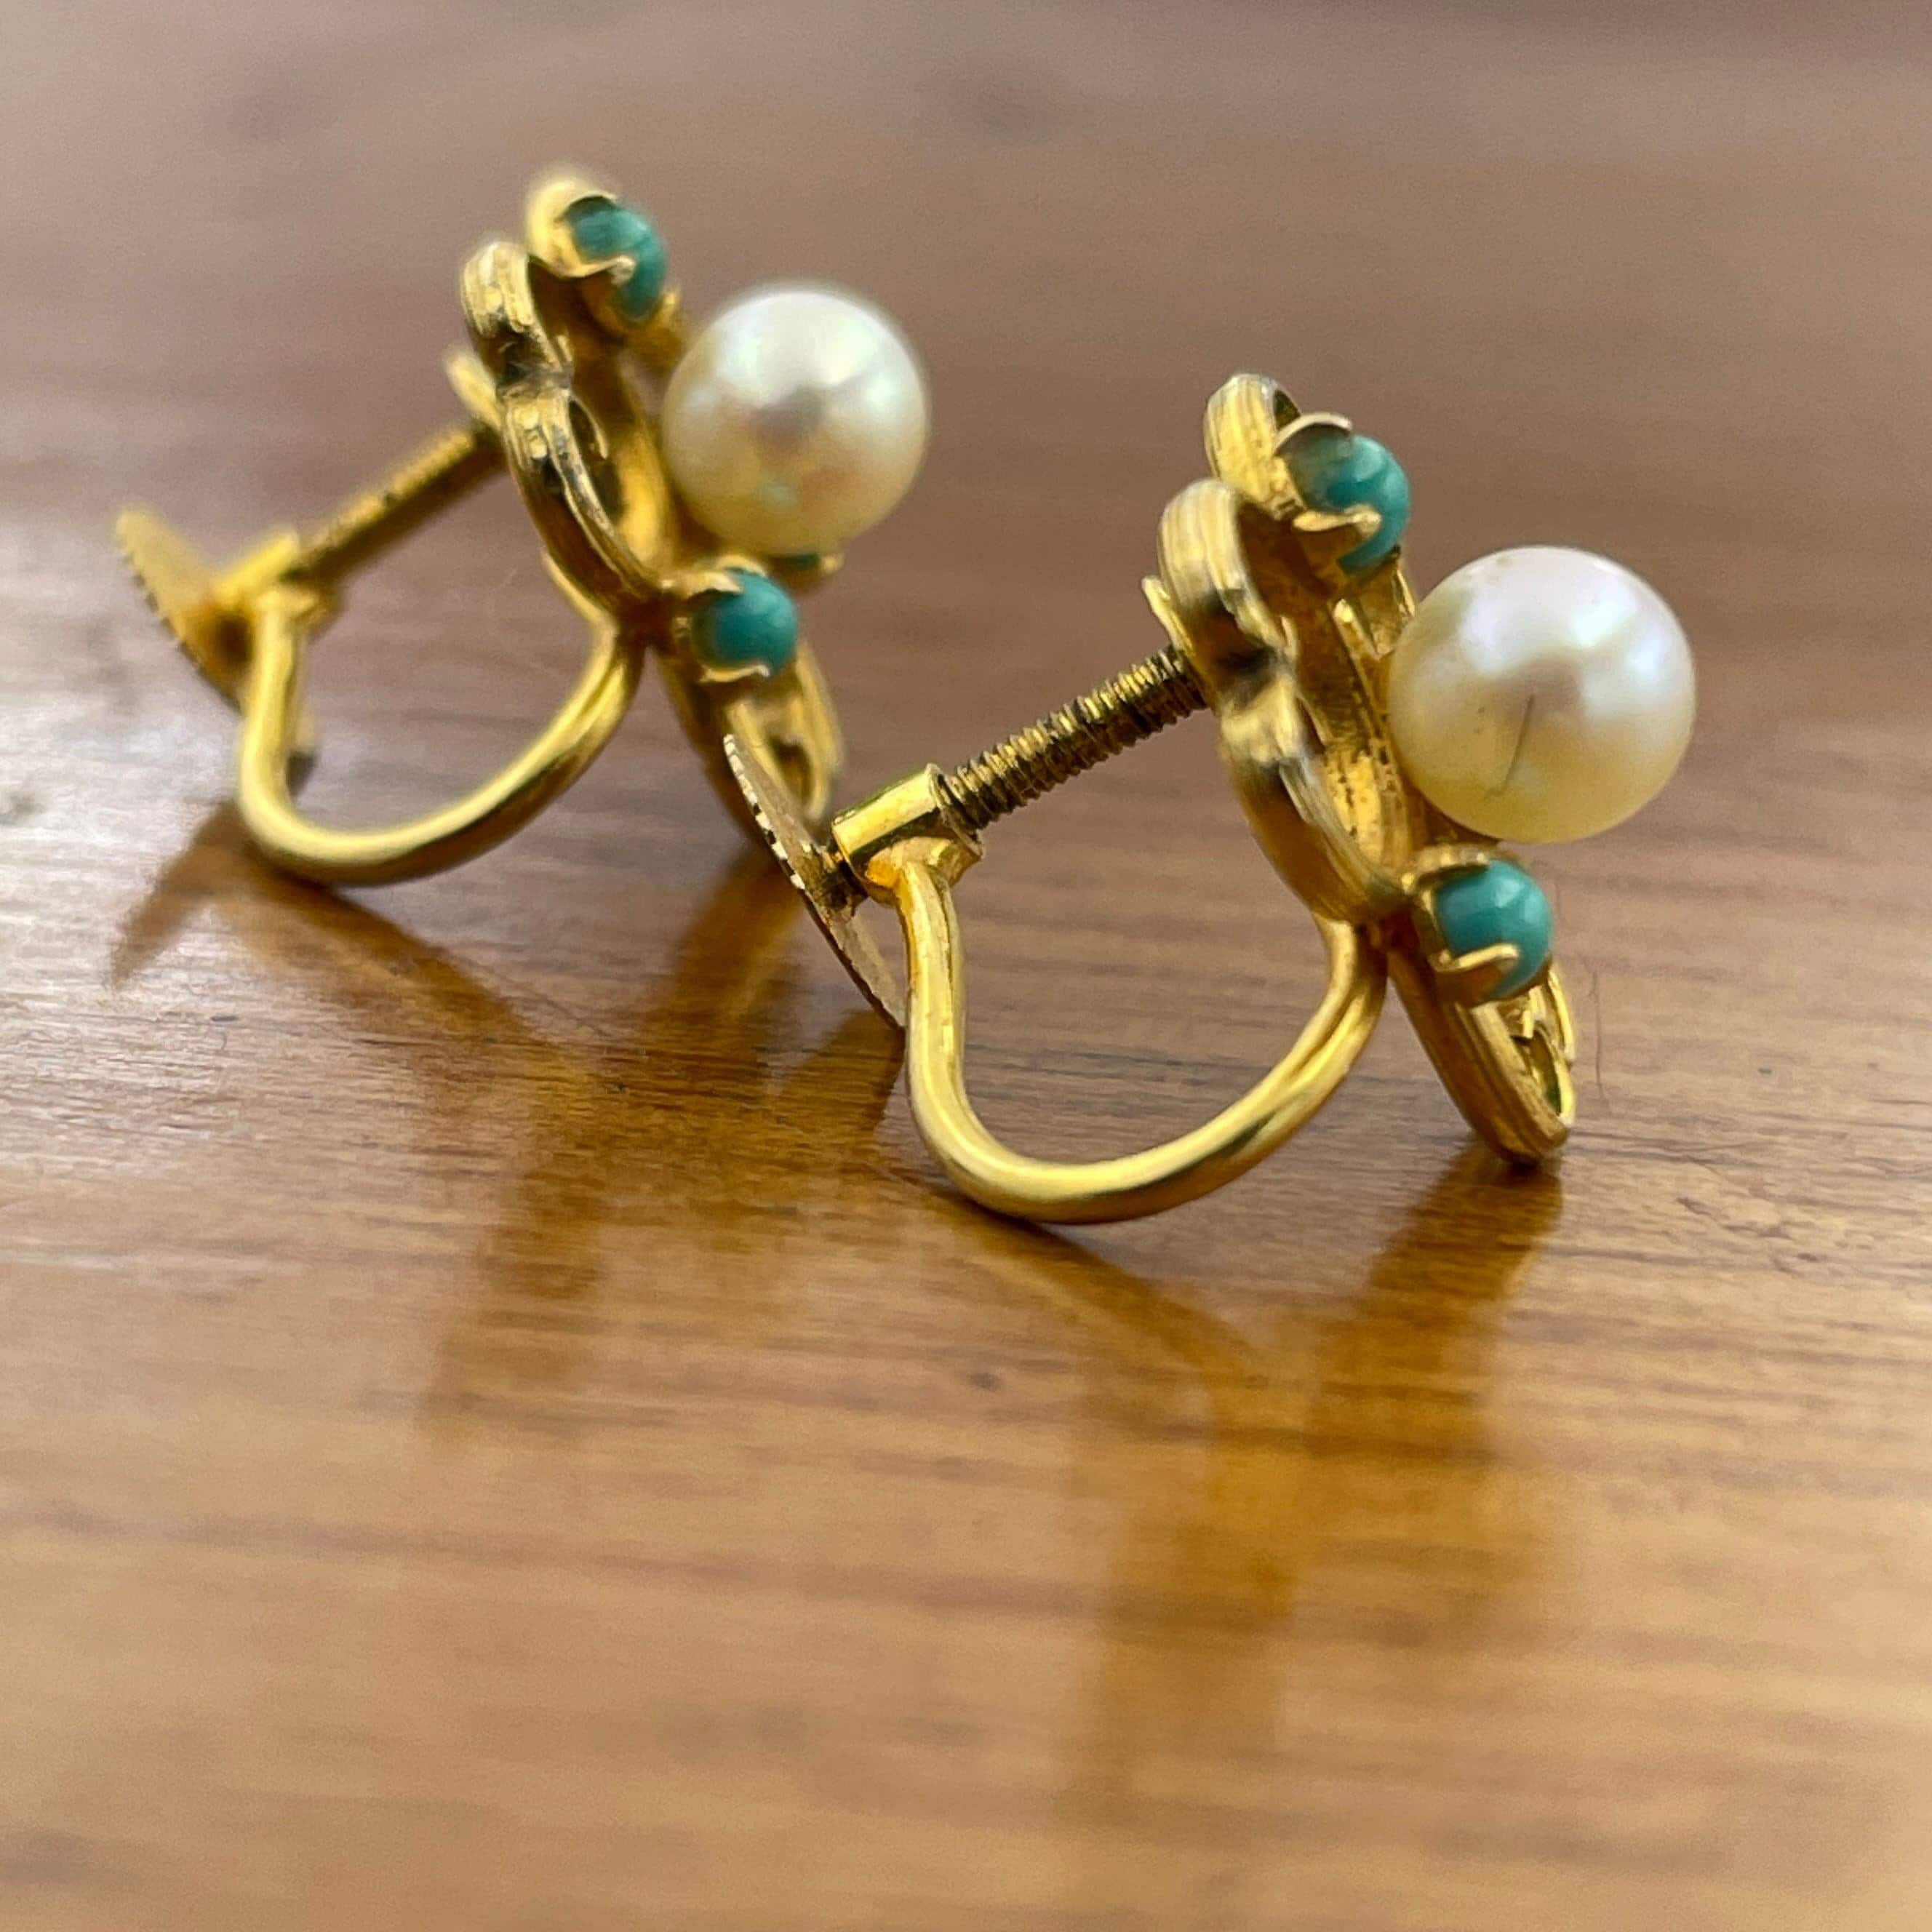 Early 20th century, 9ct gold, pearl & turquoise screw back earrings